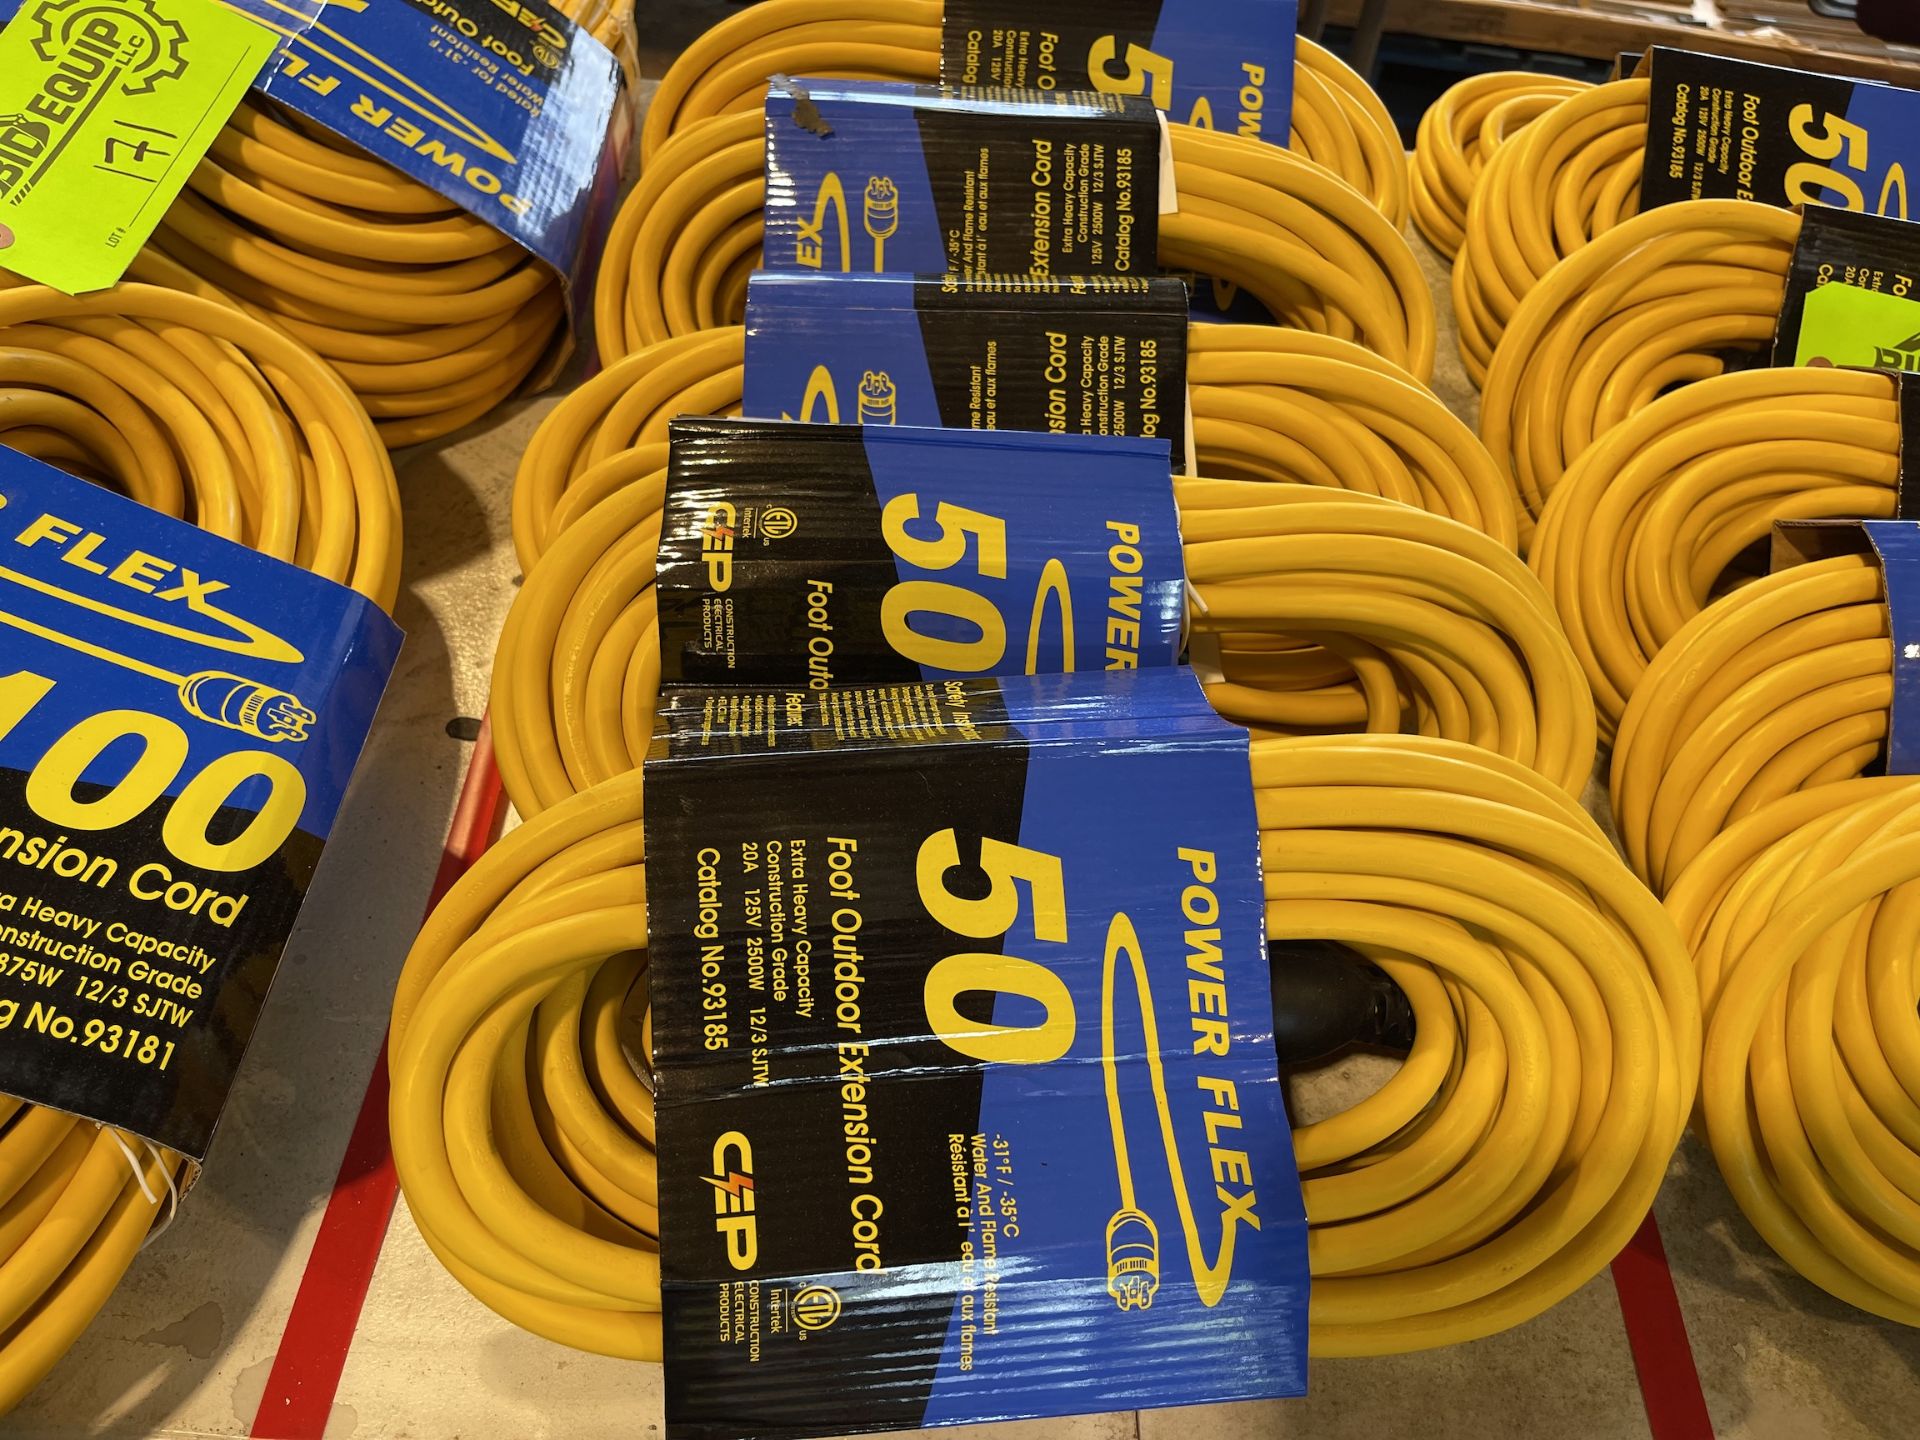 Lot of 6 50ft Outdoor Extension Cords - Upland - Image 3 of 5